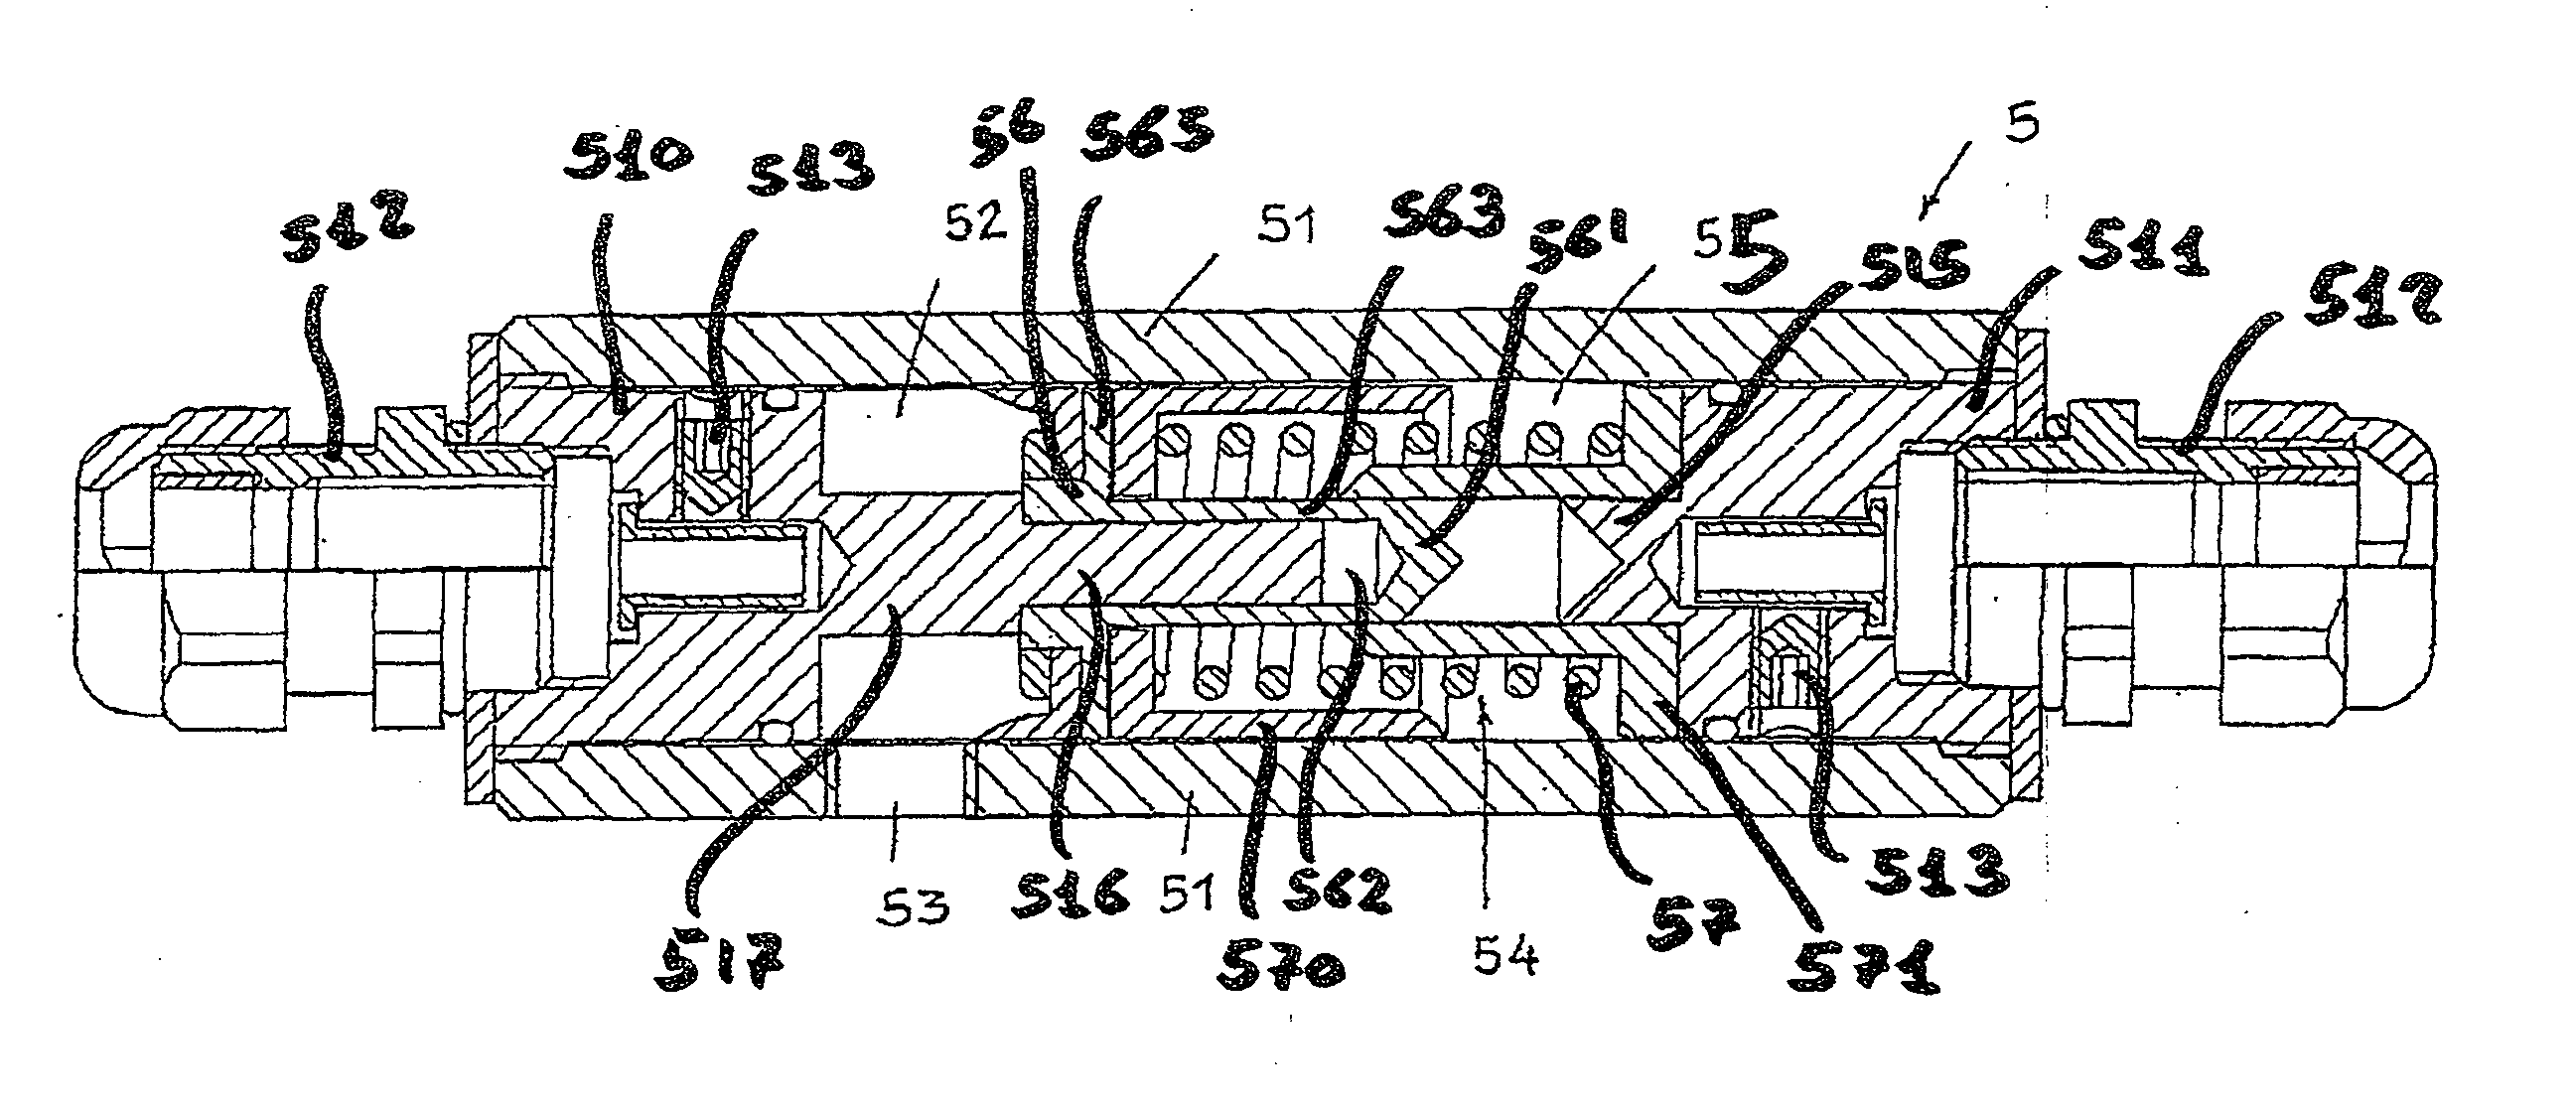 Apparatus for sectioning an electric energy flow in one or more conductors, and an electric energy generating plant comprising said apparatus